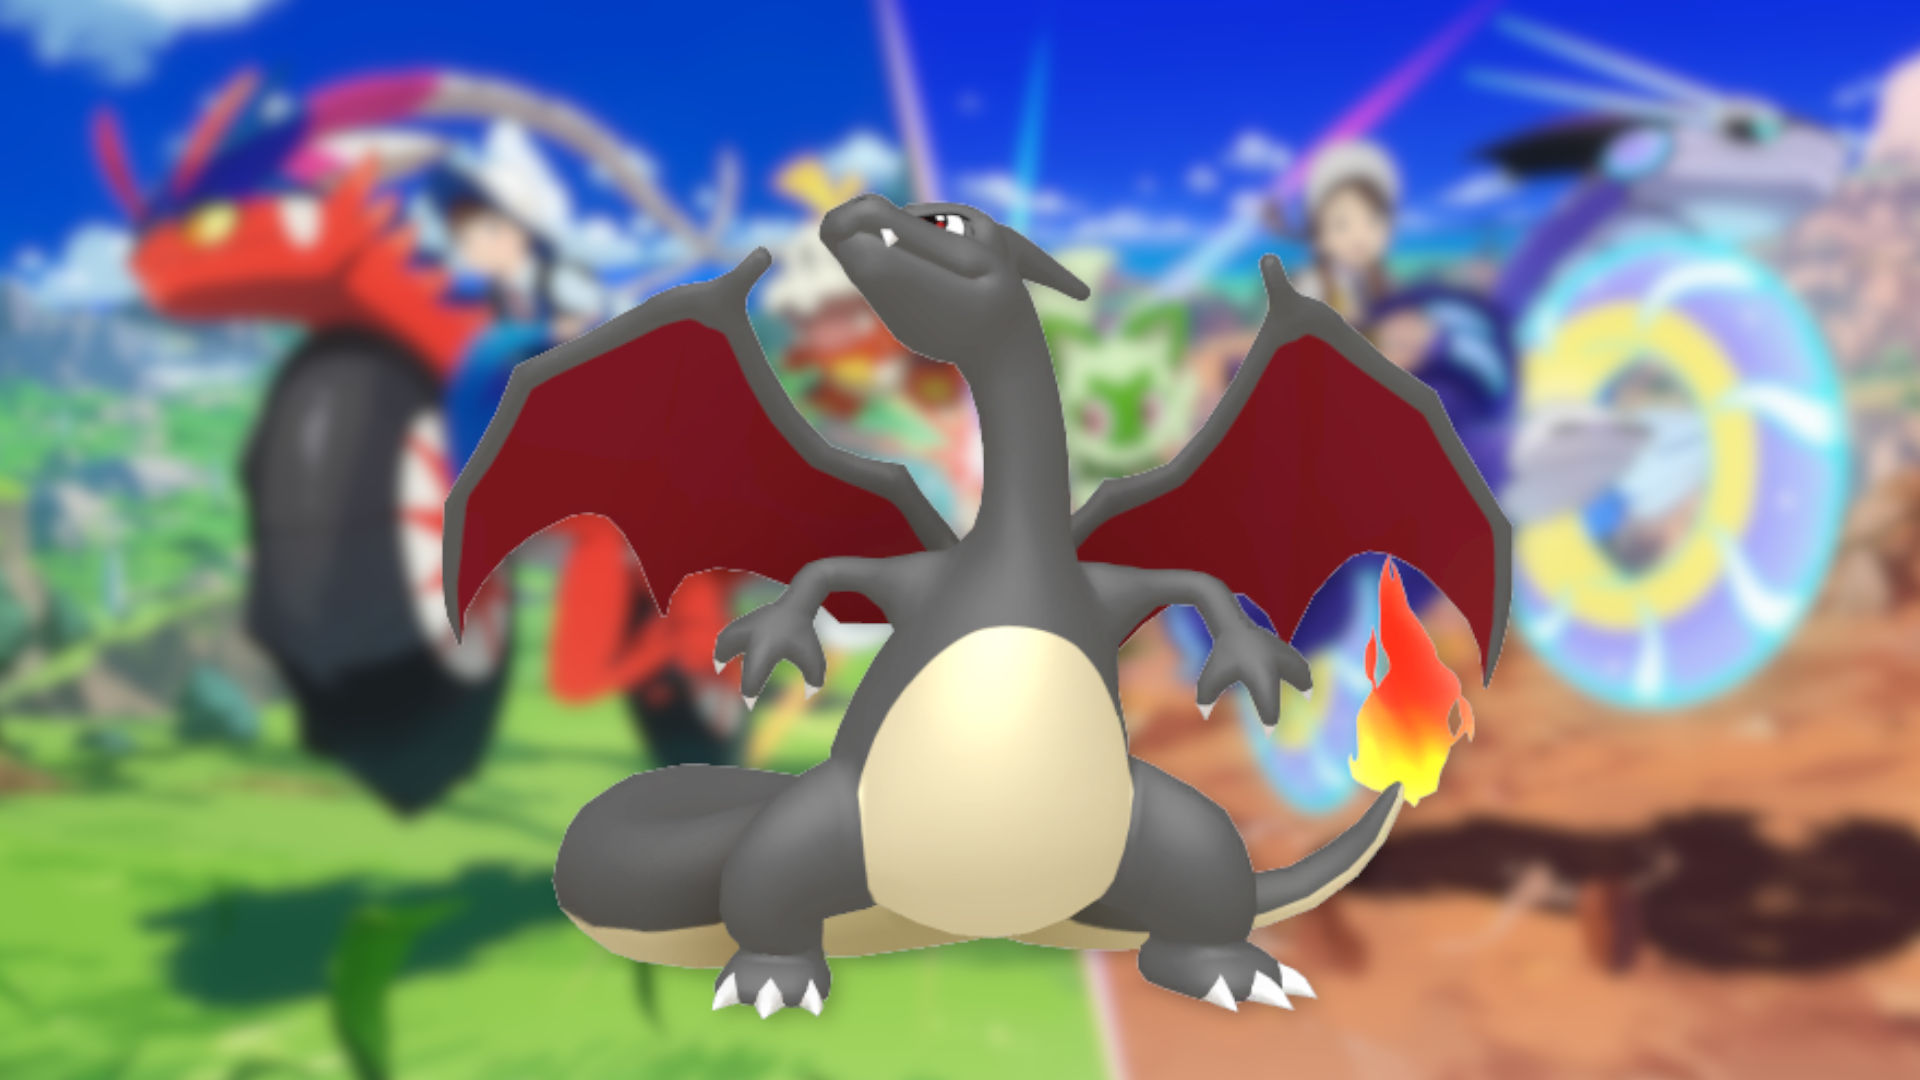 11 Shiny Pokemon That Look Nearly Identical To Their Original Form